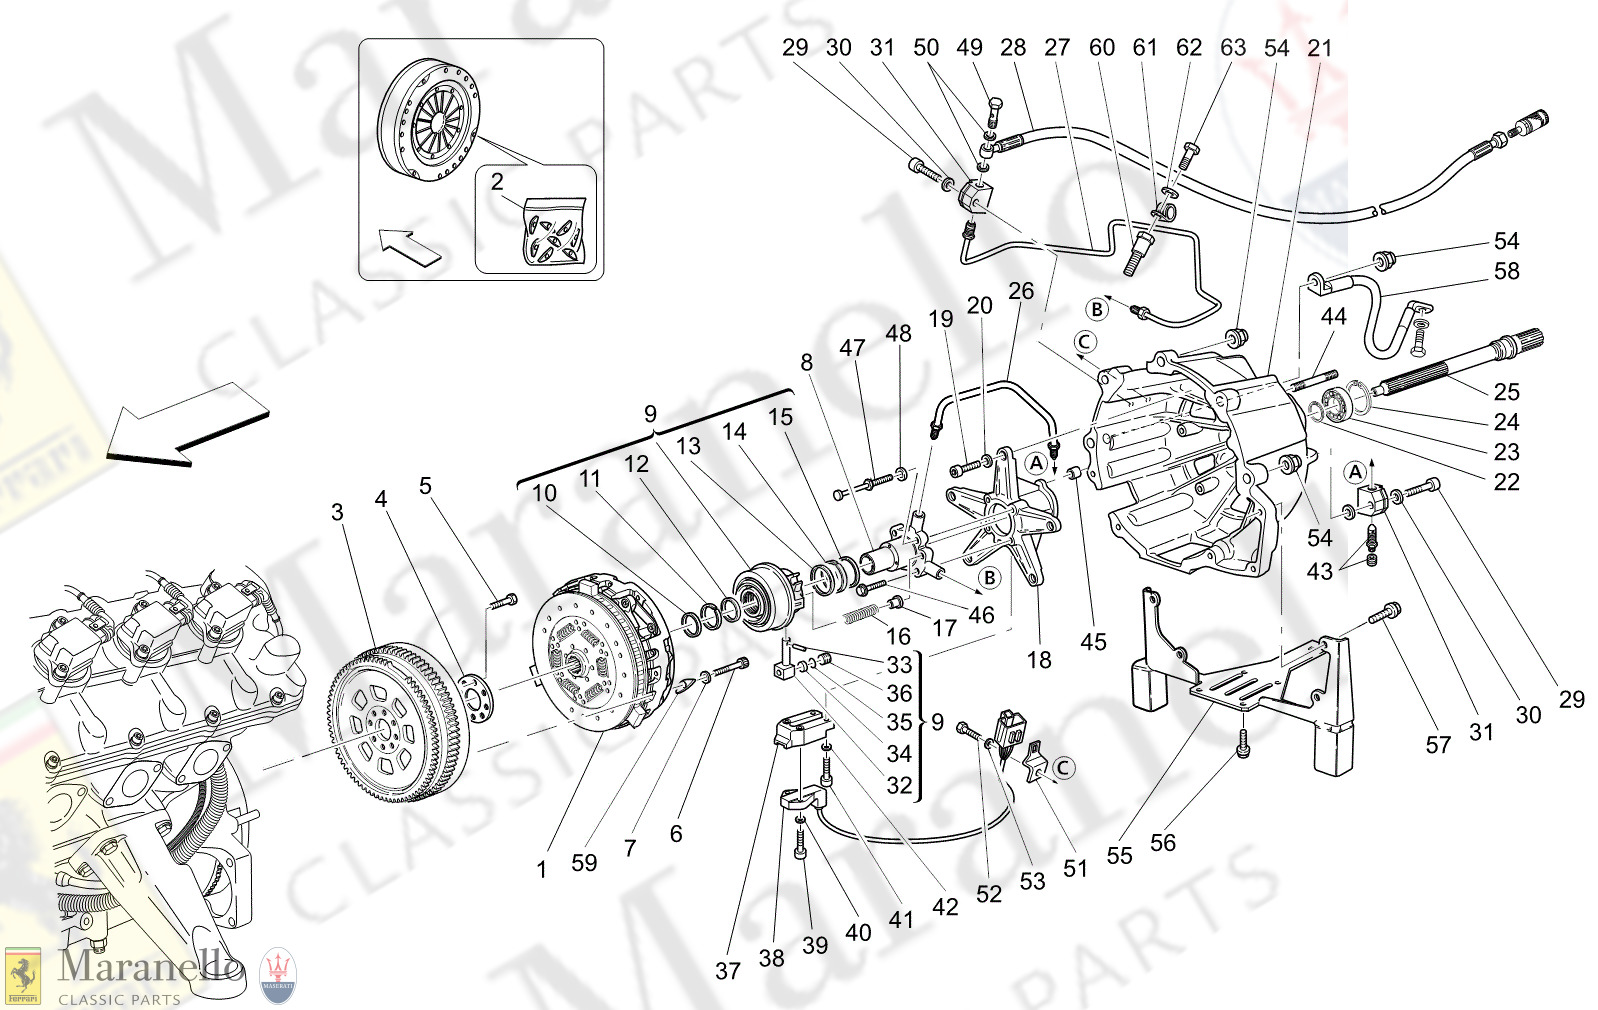 M2.11 - 15 - M211 - 15 Friction Discs And Housing For F1 Gearbox